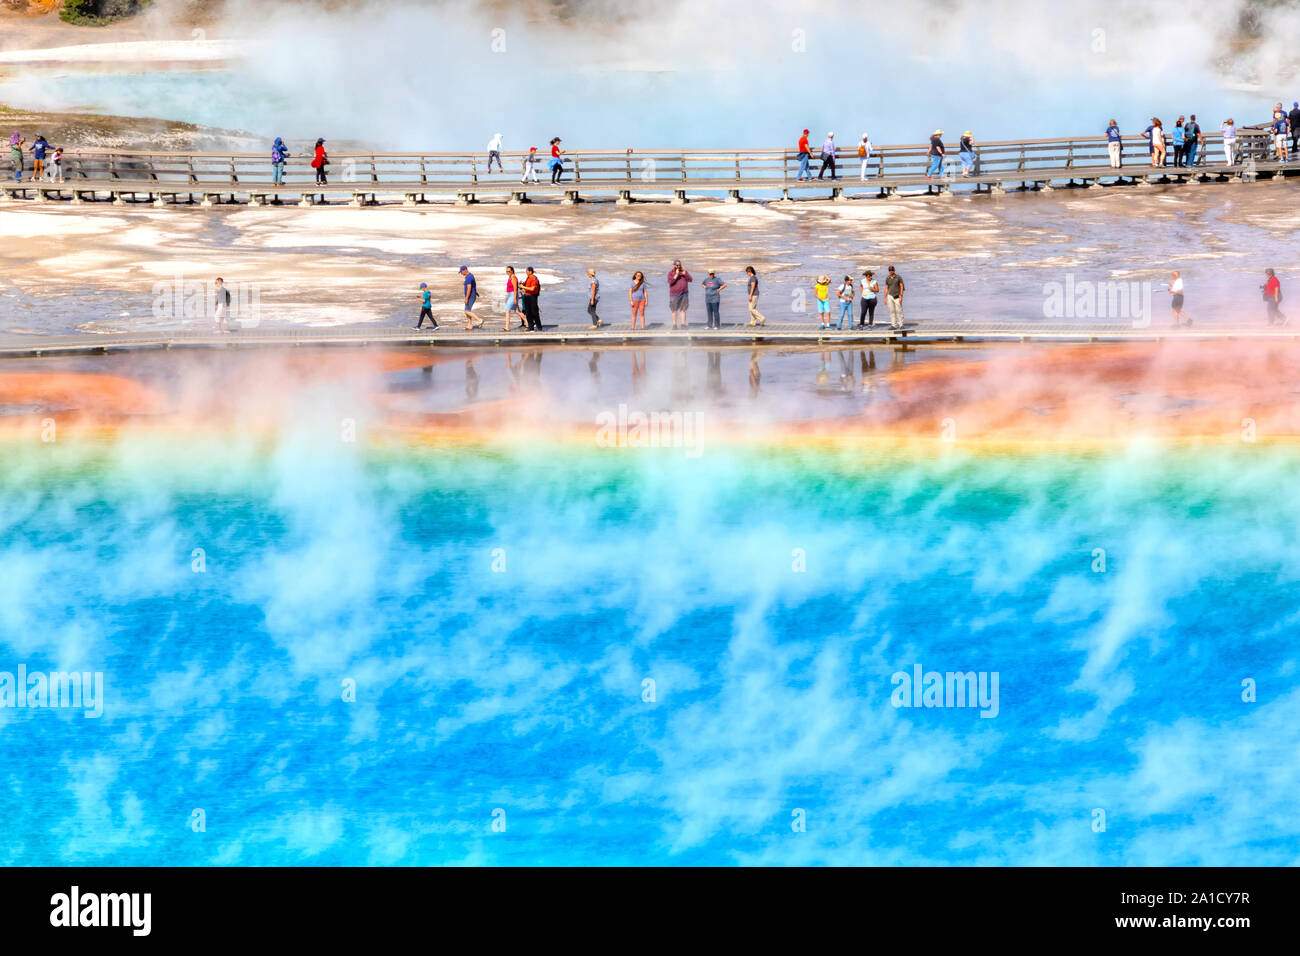 YELLOWSTONE, USA - AUG 24, 2019: Tourists on the boardwalk at Grand Prismatic Spring, the largest hot spring at Yellowstone National Park. Stock Photo